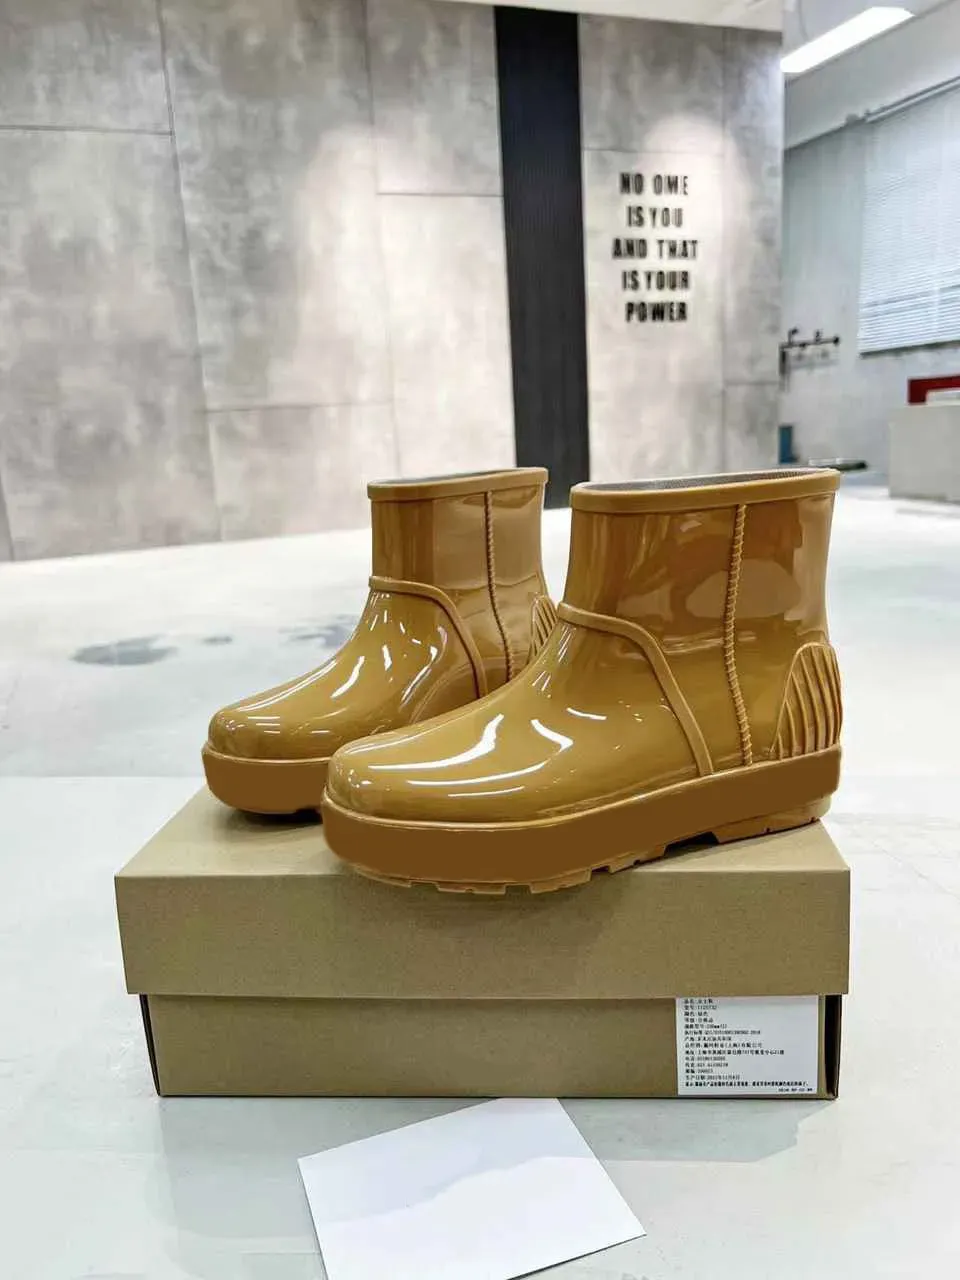 Designer Brand Snow Boots Fall Winter Women Rain Boot Candy Color Rubber Waterproof Shoes Walking Ankle Boots Casual Platform Booties PVC Cold Resistant Bootss